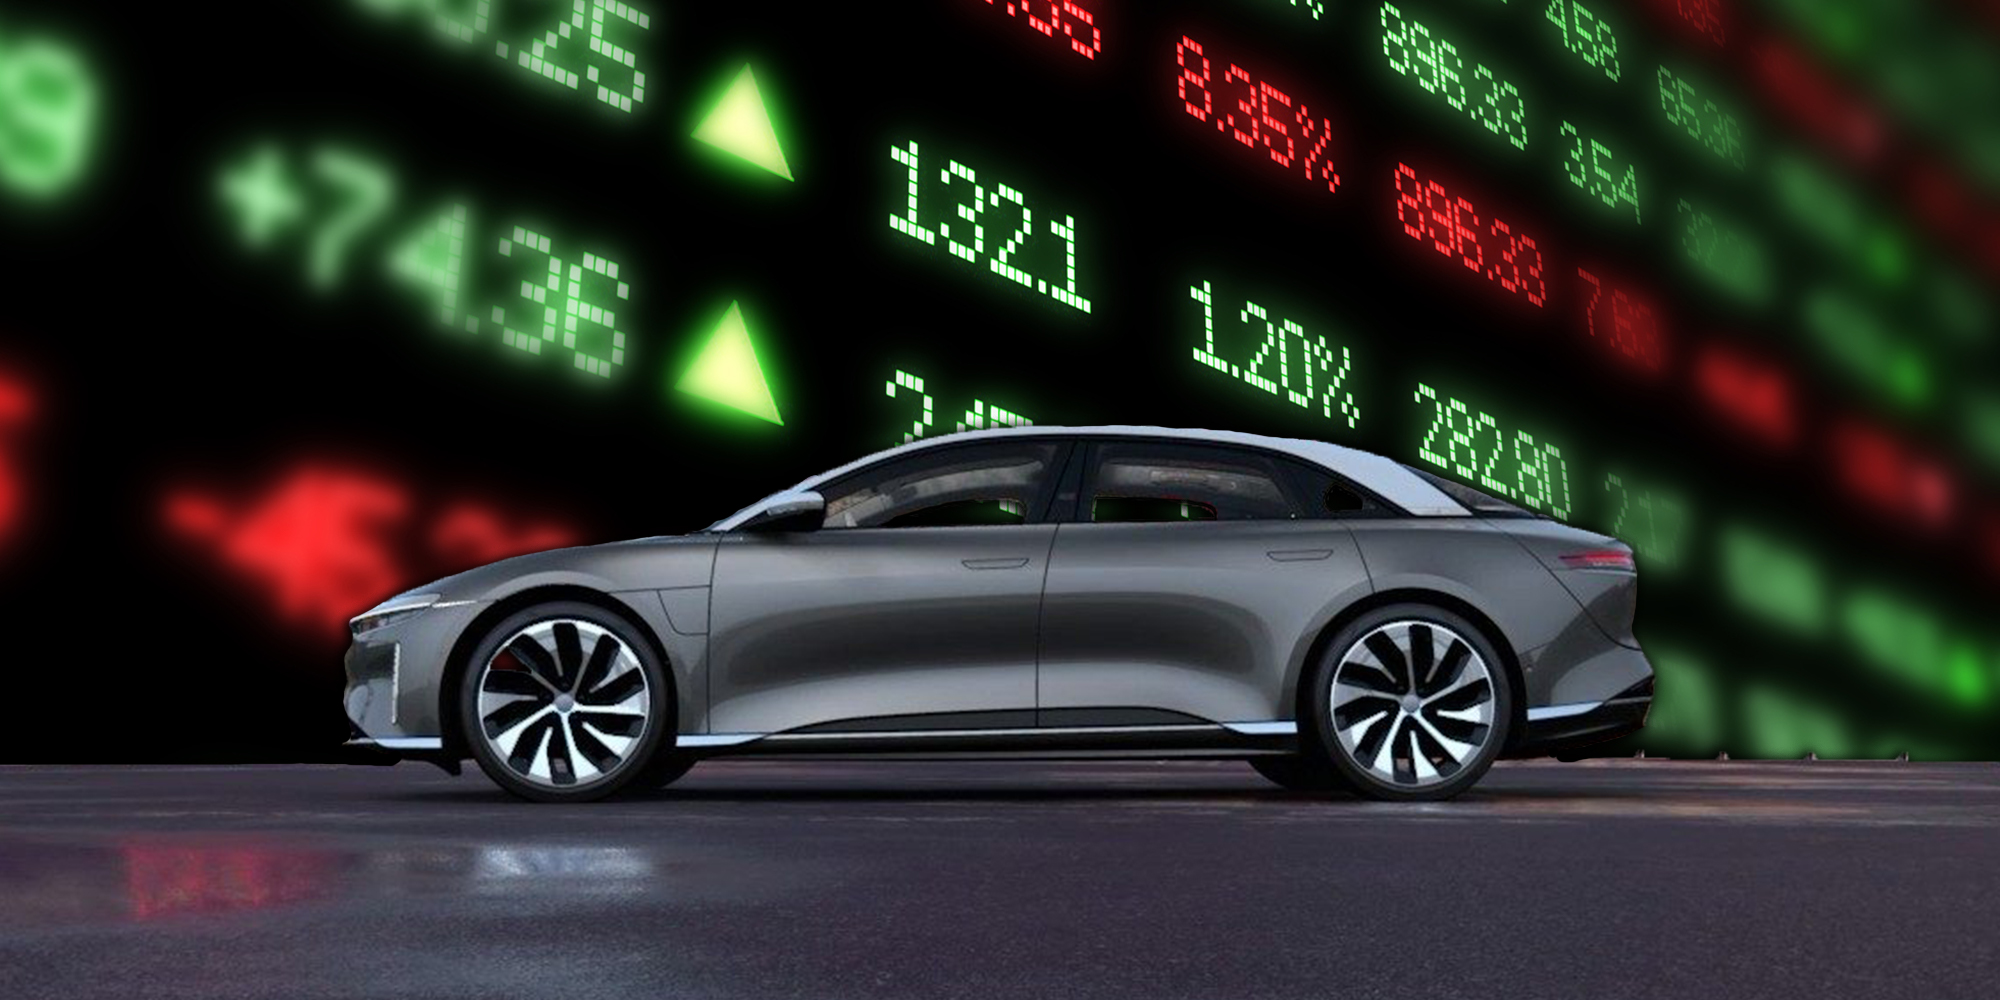 pin by doberman pinscher on bitcoin - crypto in 2021 project success 30 day challenge success stories on how to buy lucid motors stock on robinhood